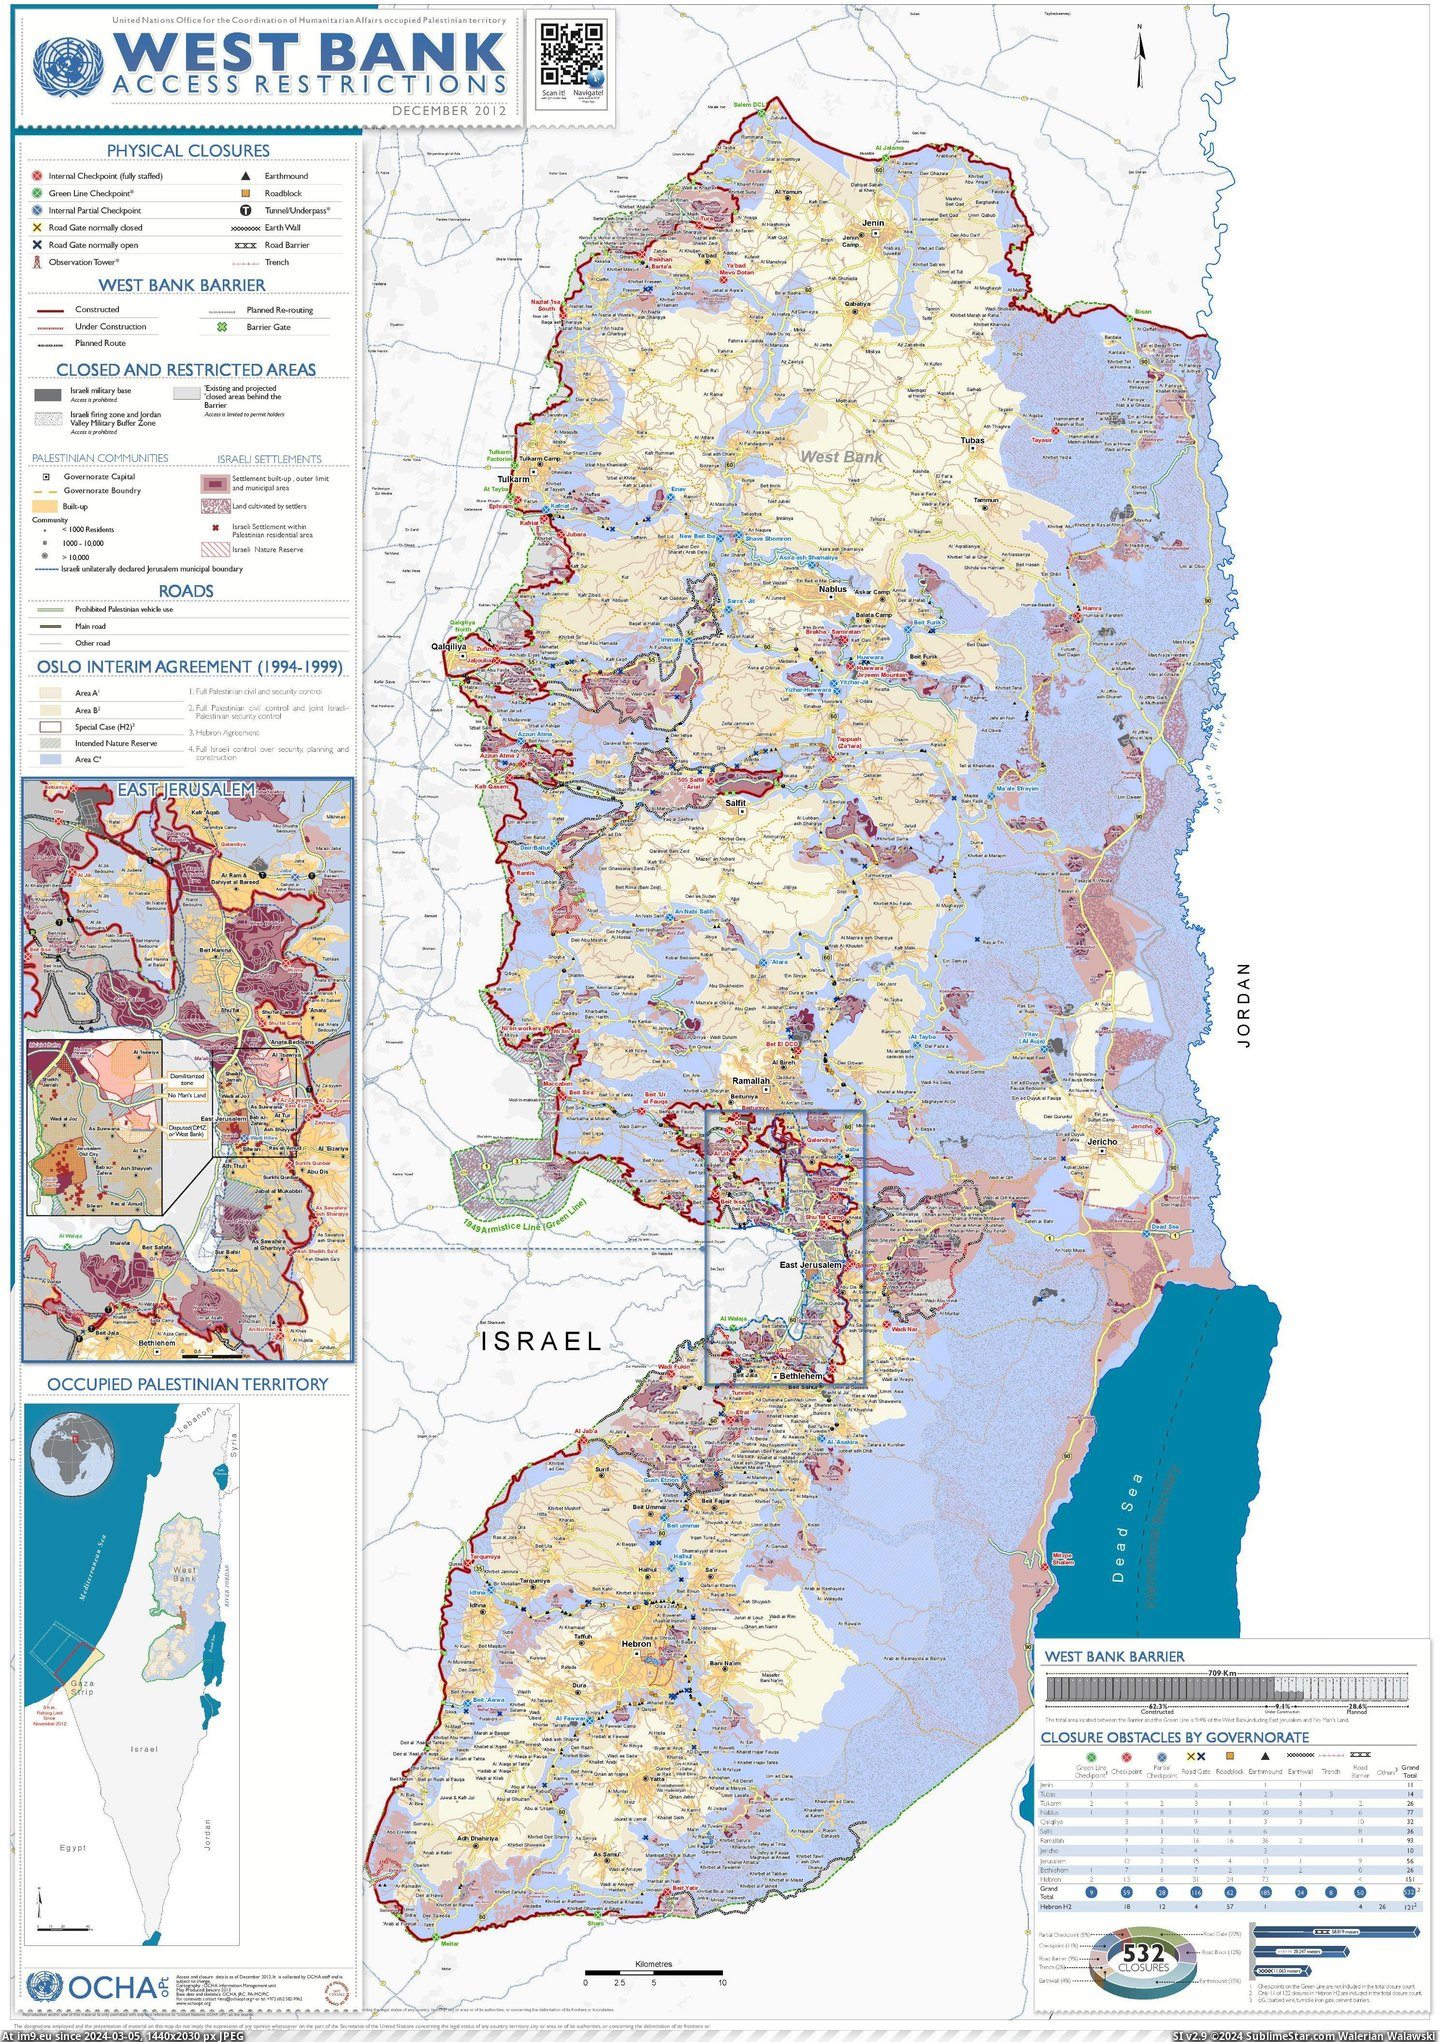 #West #Bank #Restrictions #Access [Mapporn] West Bank Access Restrictions (December 2012) [4967x7022] Pic. (Obraz z album My r/MAPS favs))